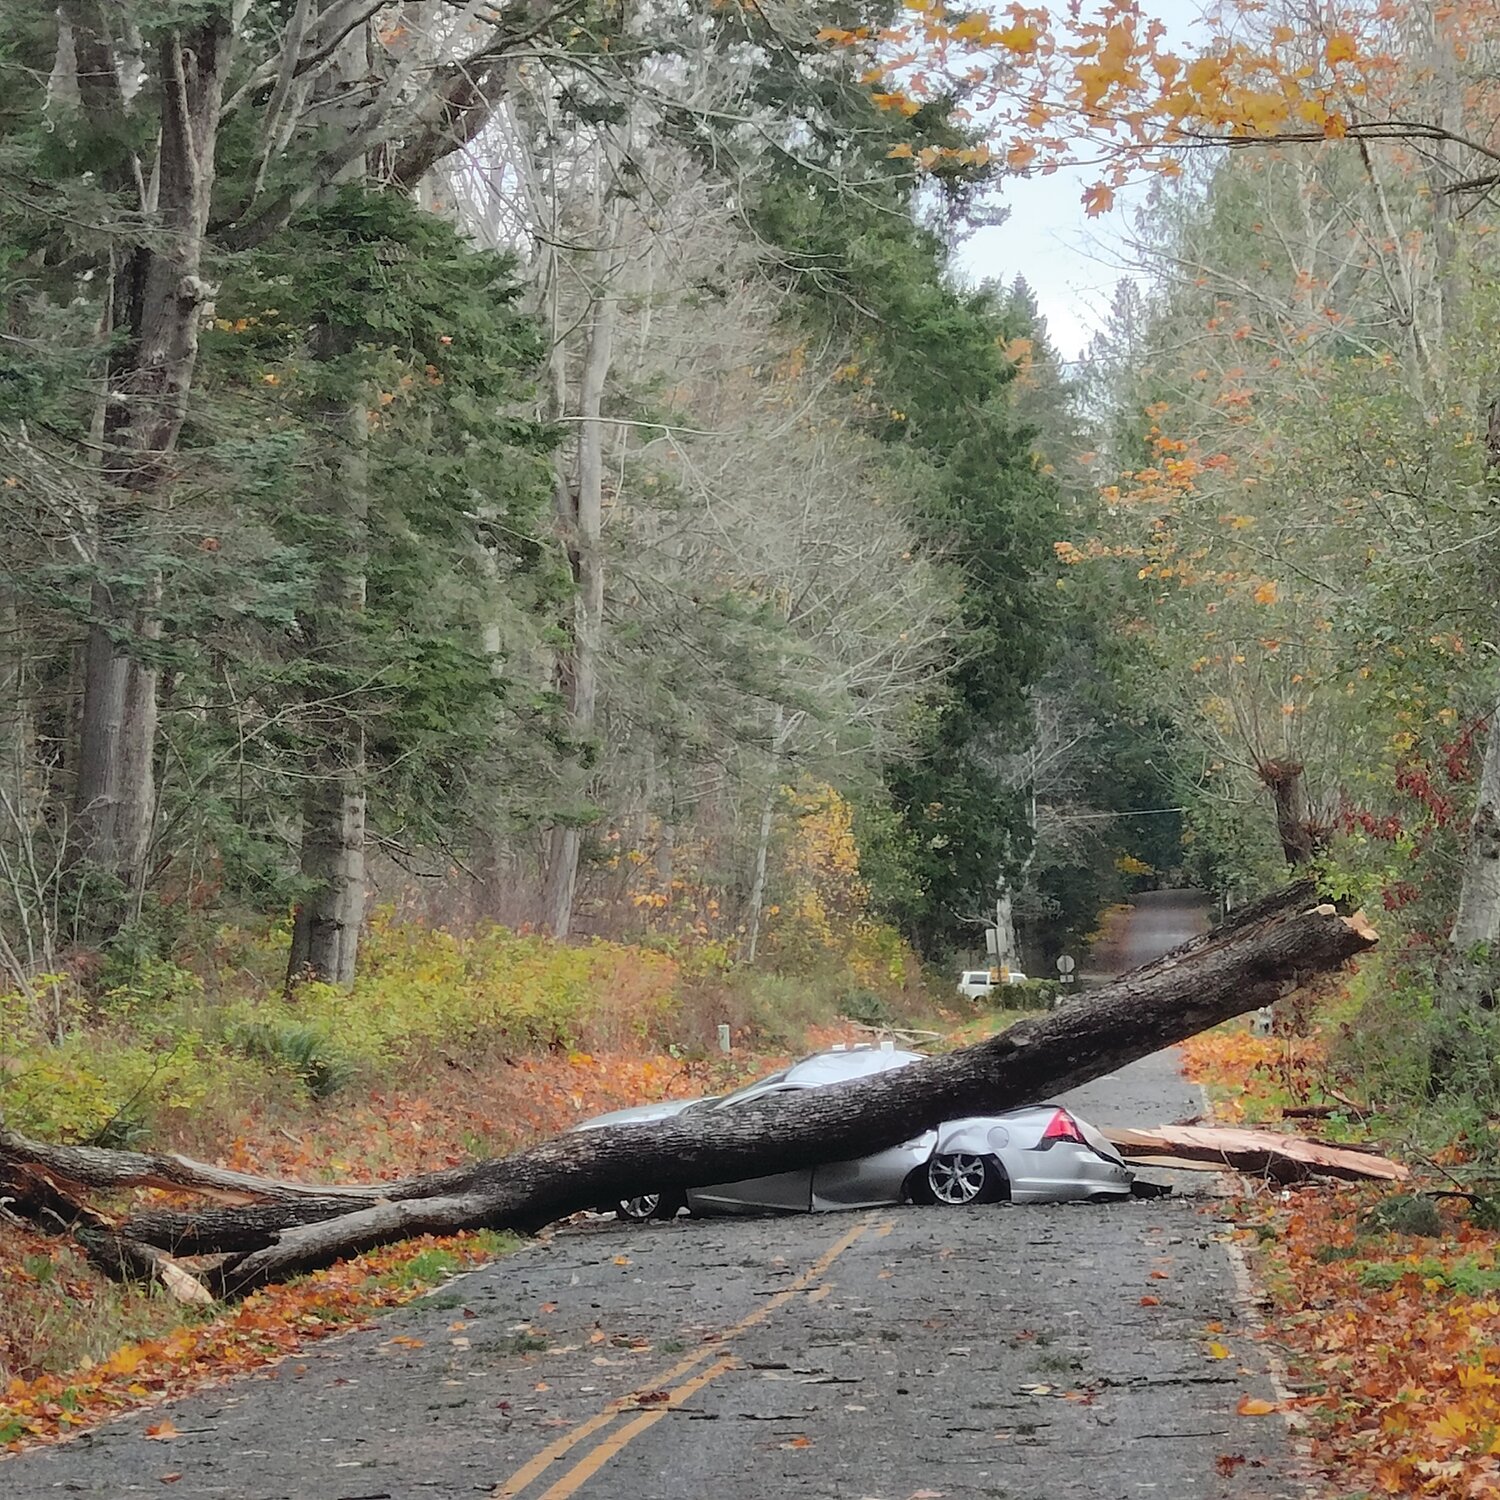 The driver and passenger were lucky to escape unharmed when a maple fell on their car during the November 10 windstorm. The same cannot be said of the vehicle, however. 